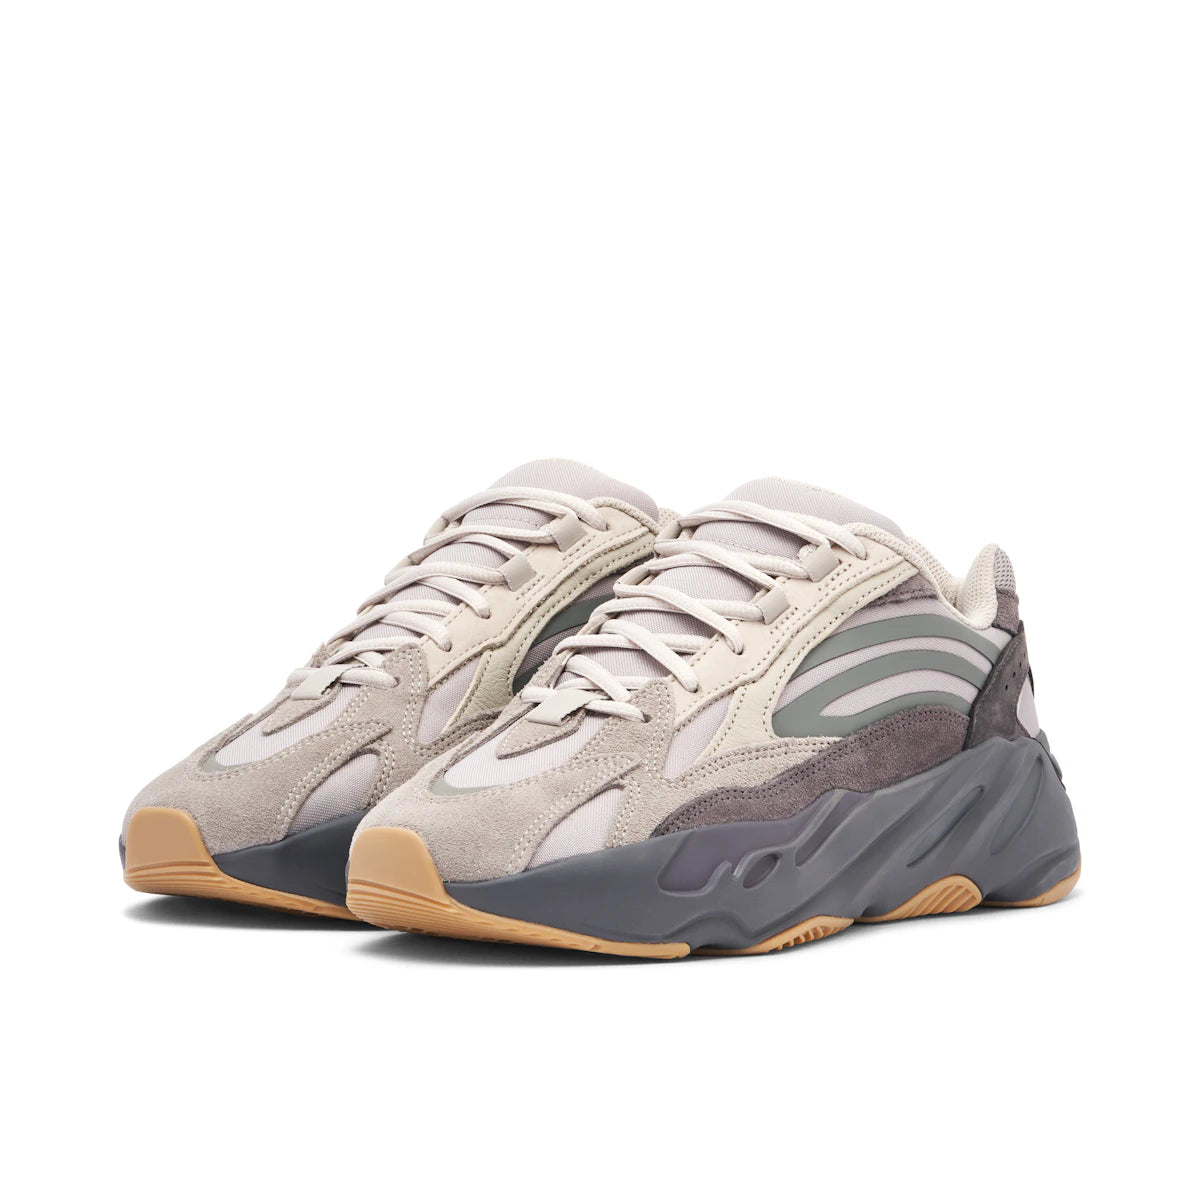 Adidas Yeezy Boost 700 V2 Tephra by Yeezy from £270.99